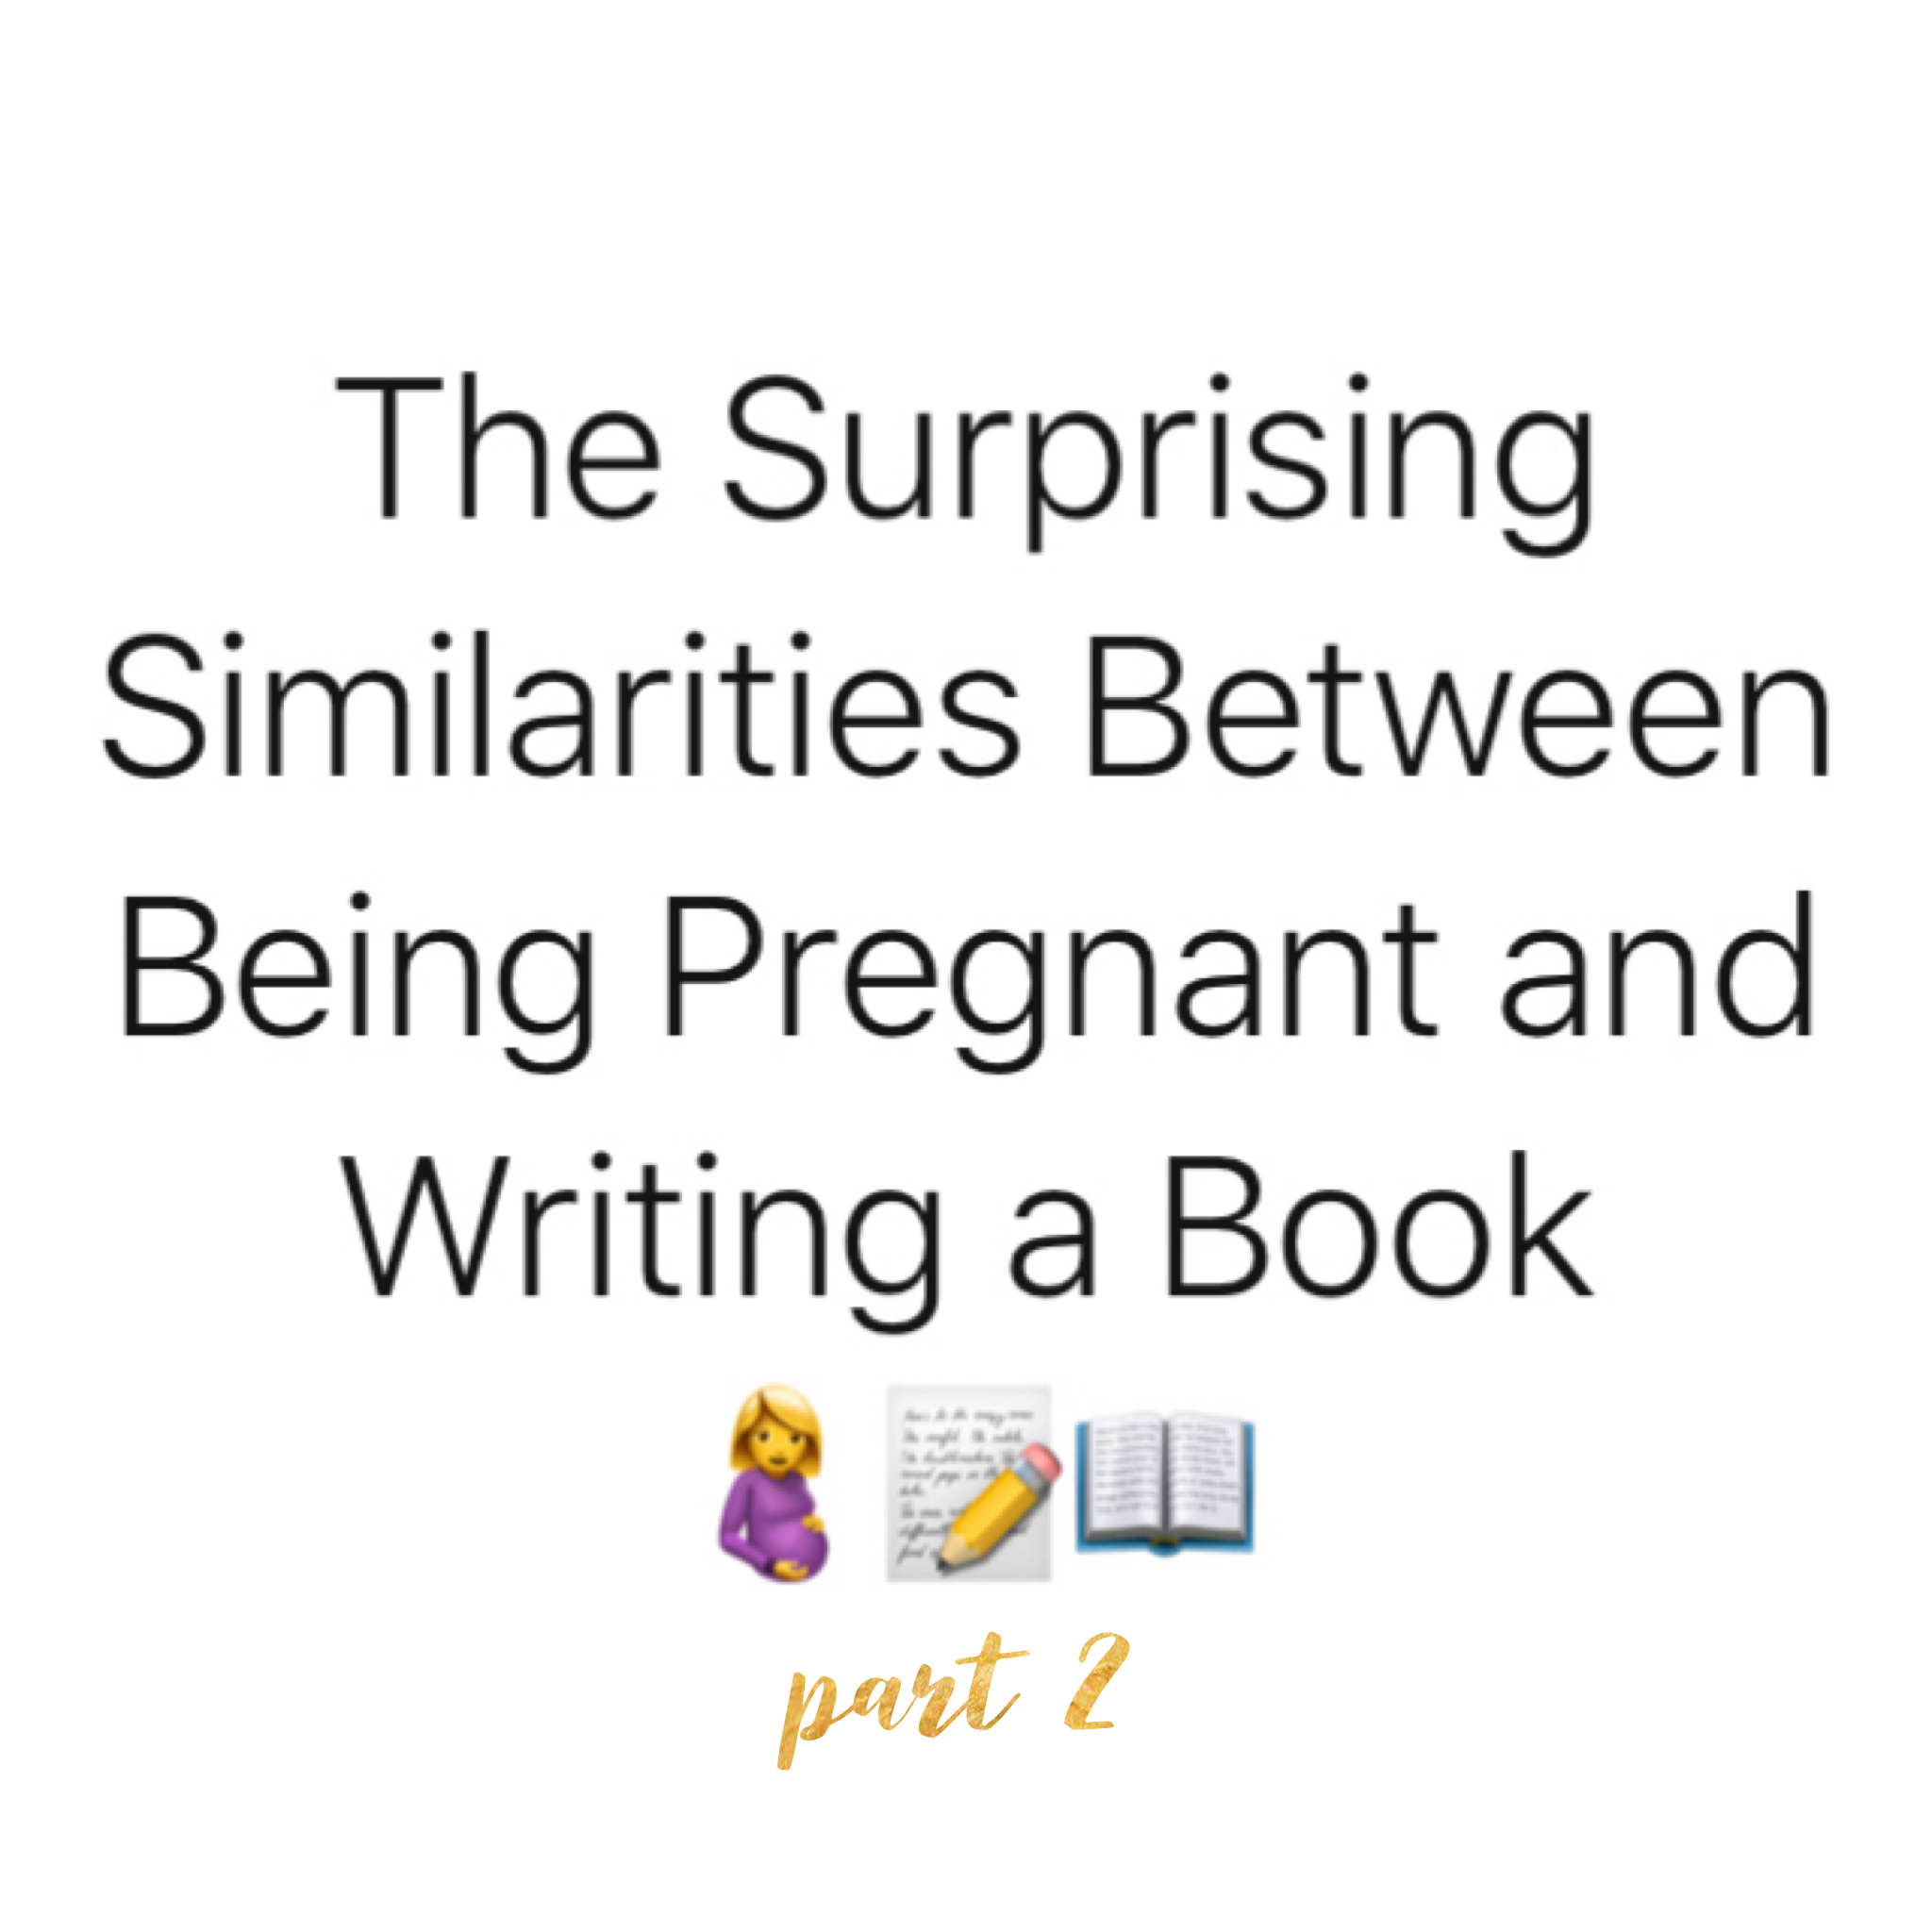 The Surprising Similarities Between Being Pregnant and Writing a Book - Part 2 by Diana Tyler